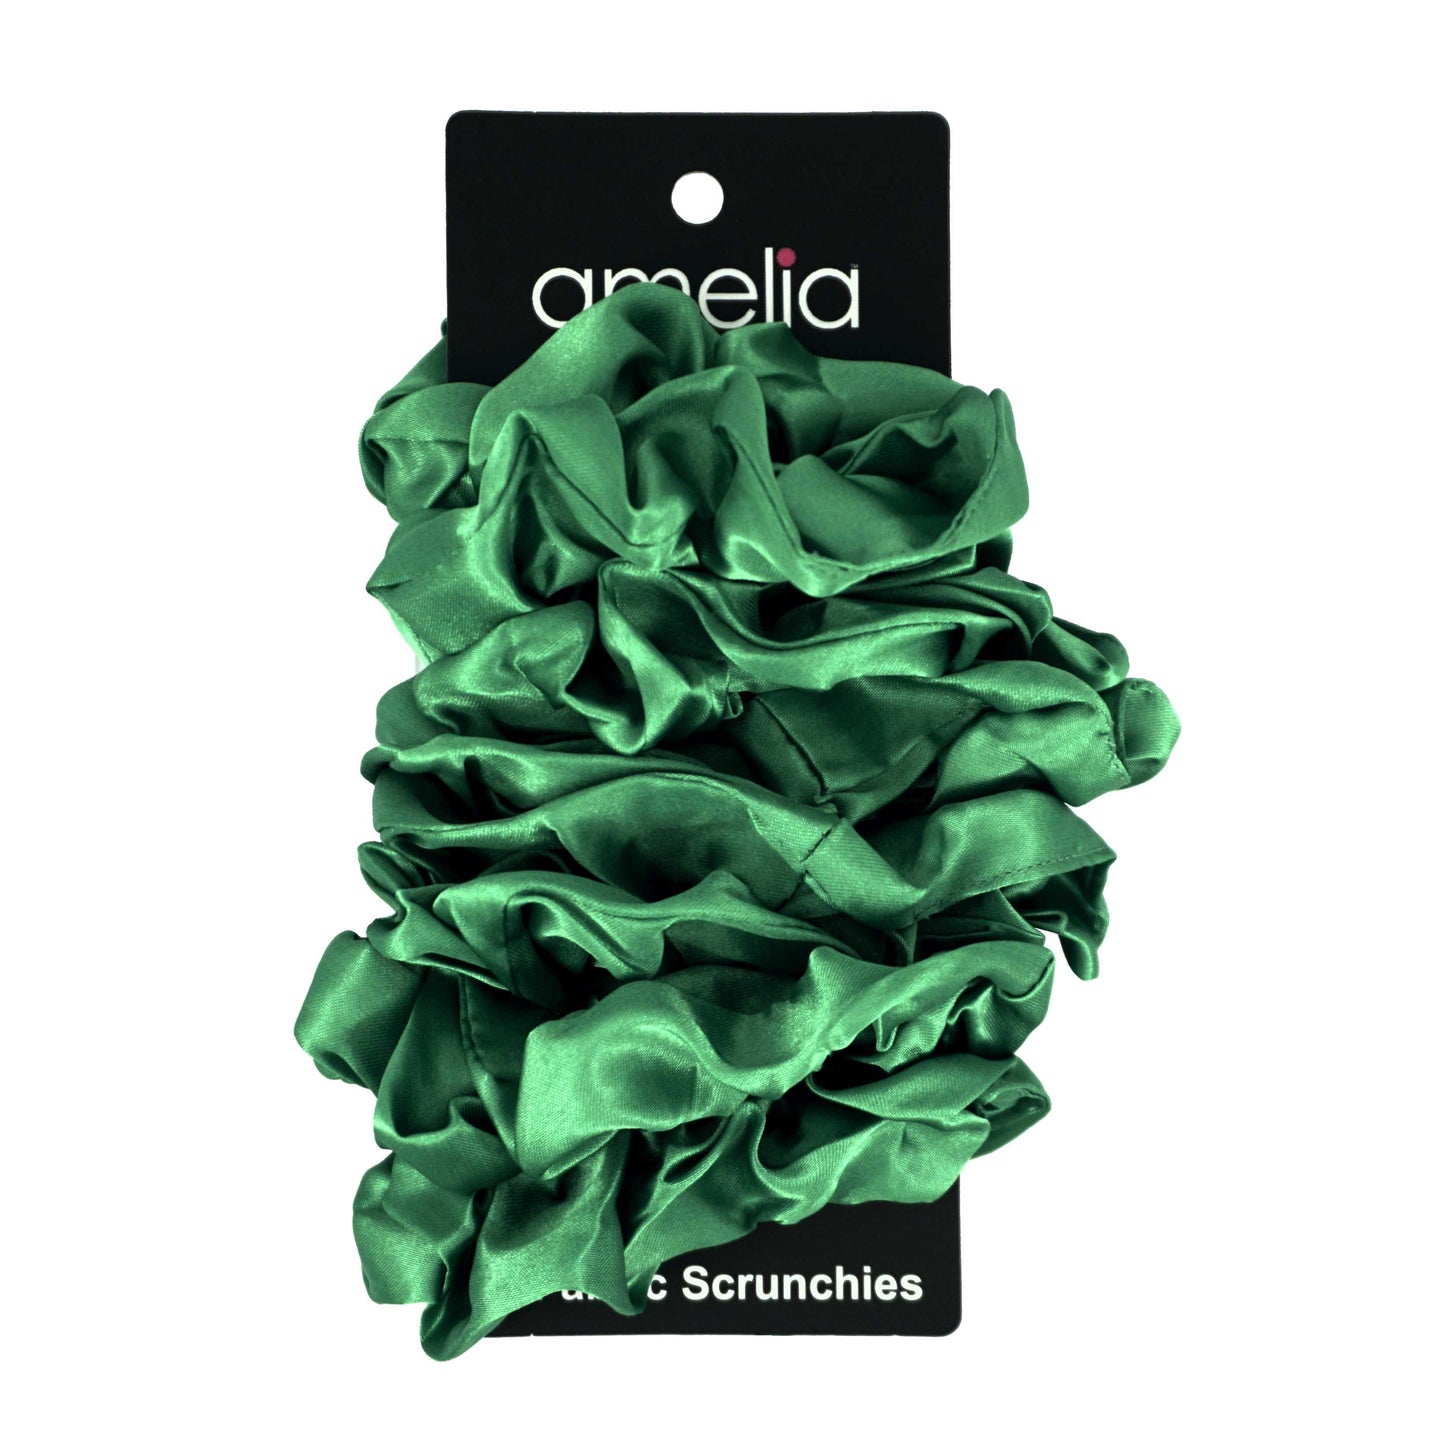 Amelia Beauty Products, Green Satin Scrunchies, 3.5in Diameter, Gentle on Hair, Strong Hold, No Snag, No Dents or Creases. 8 Pack